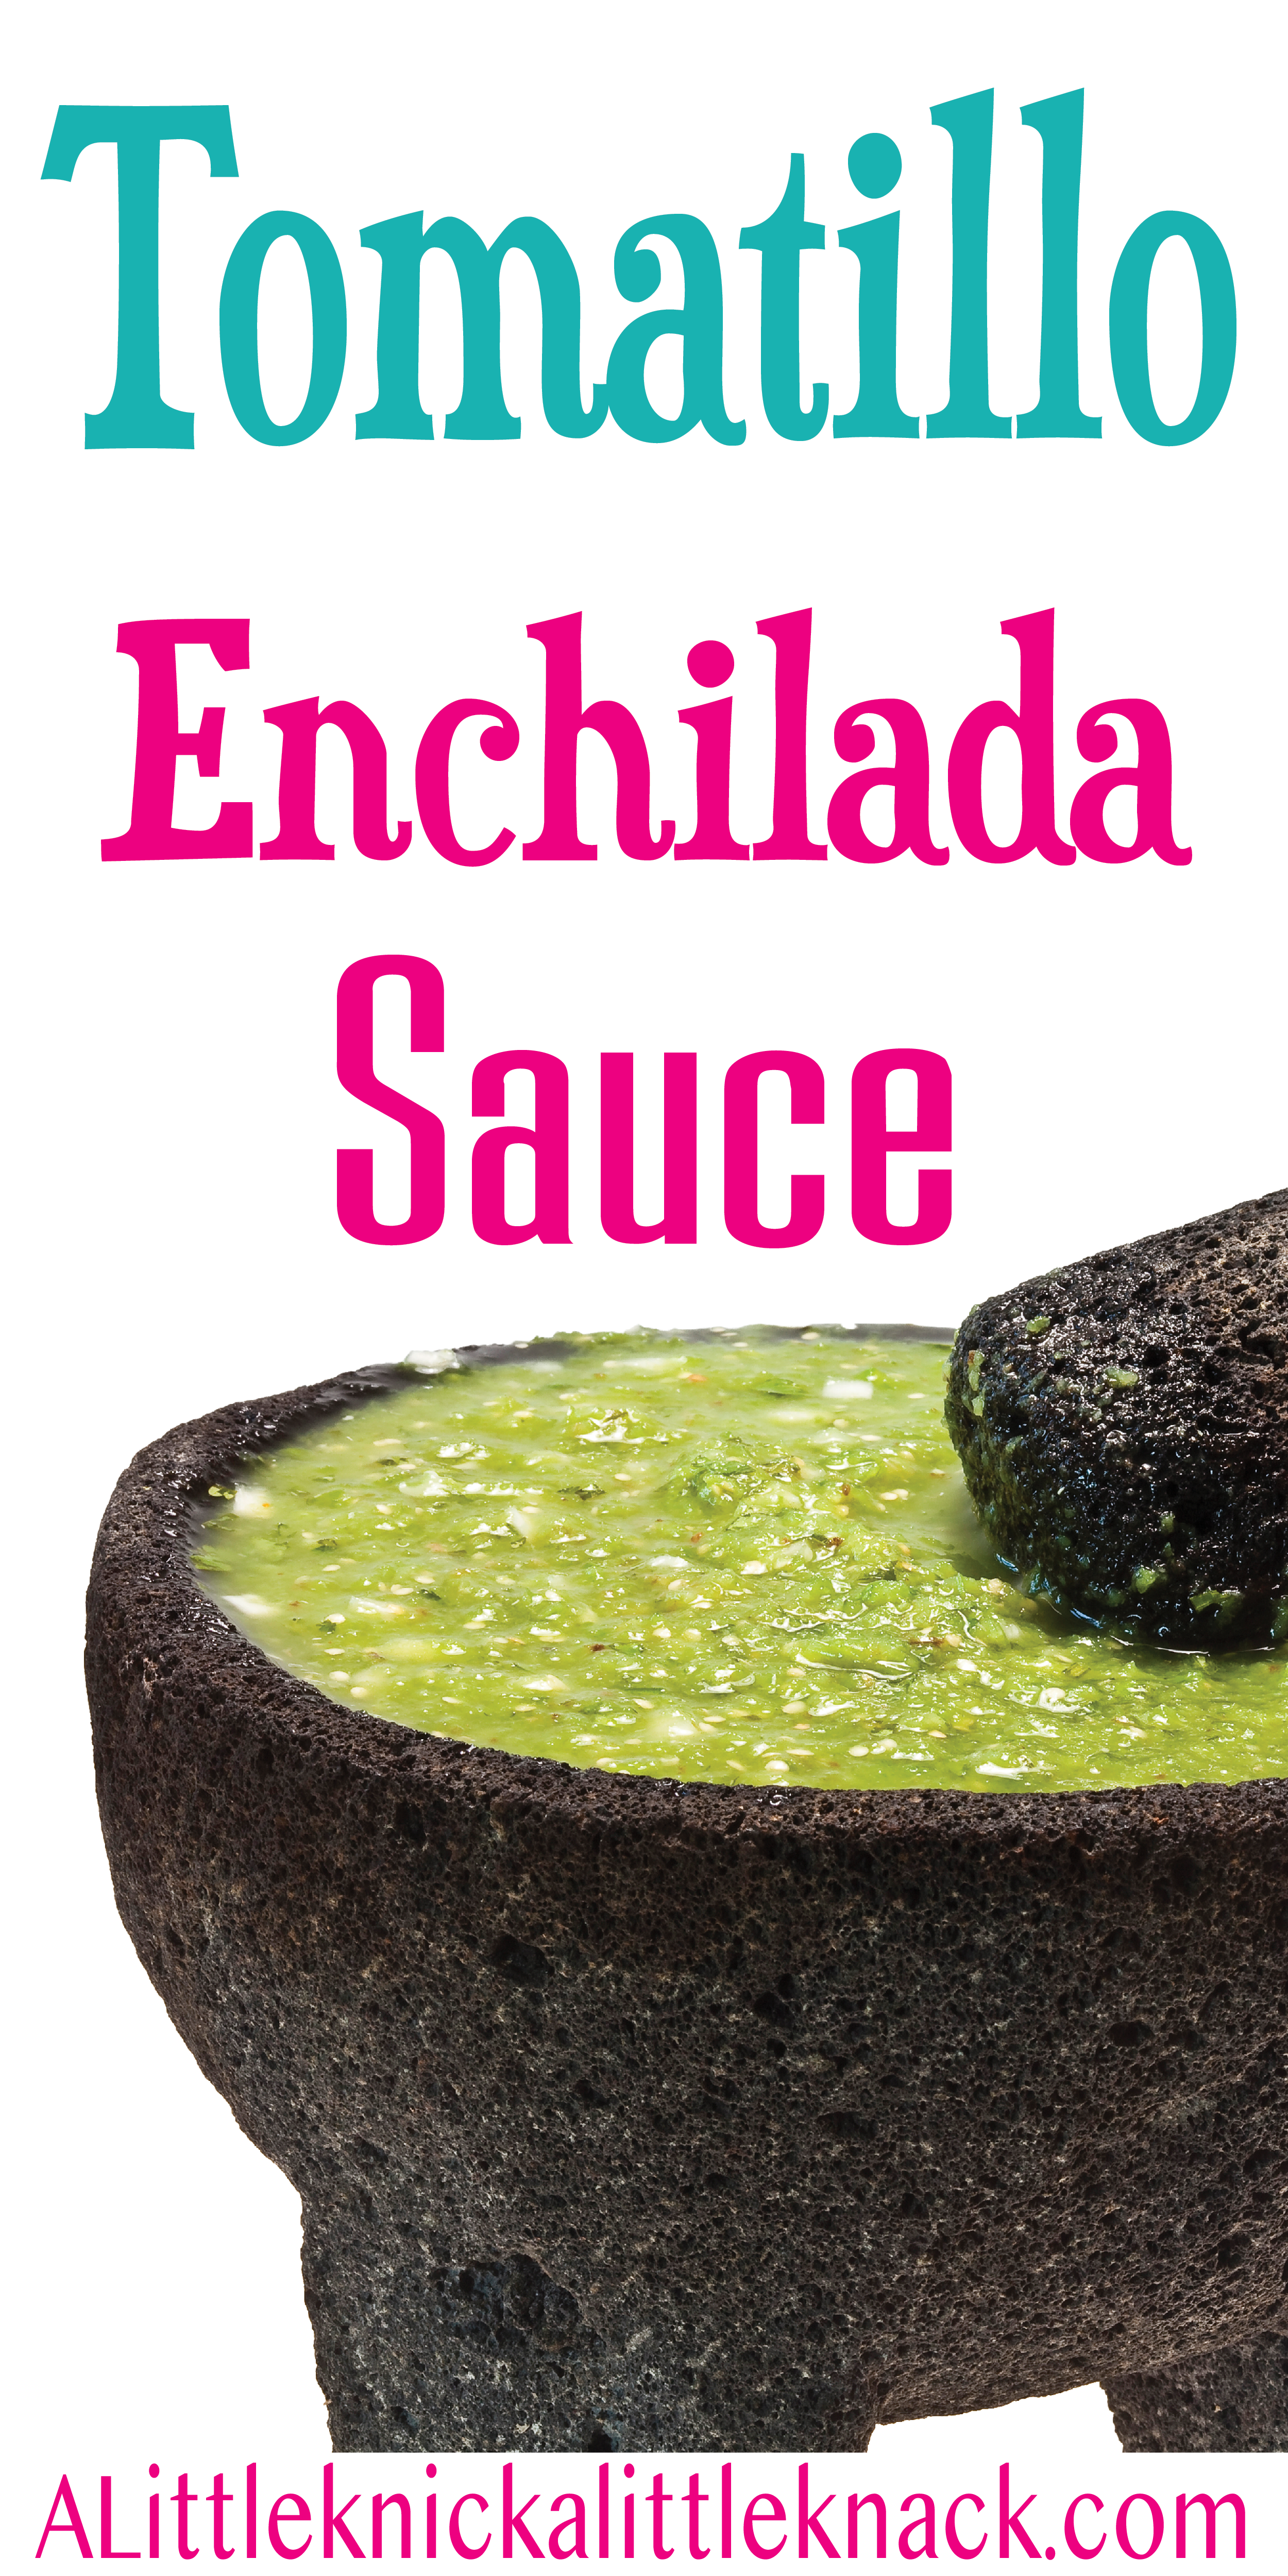 Tomatillo enchilada sauce in a molcajete with a text overlay.